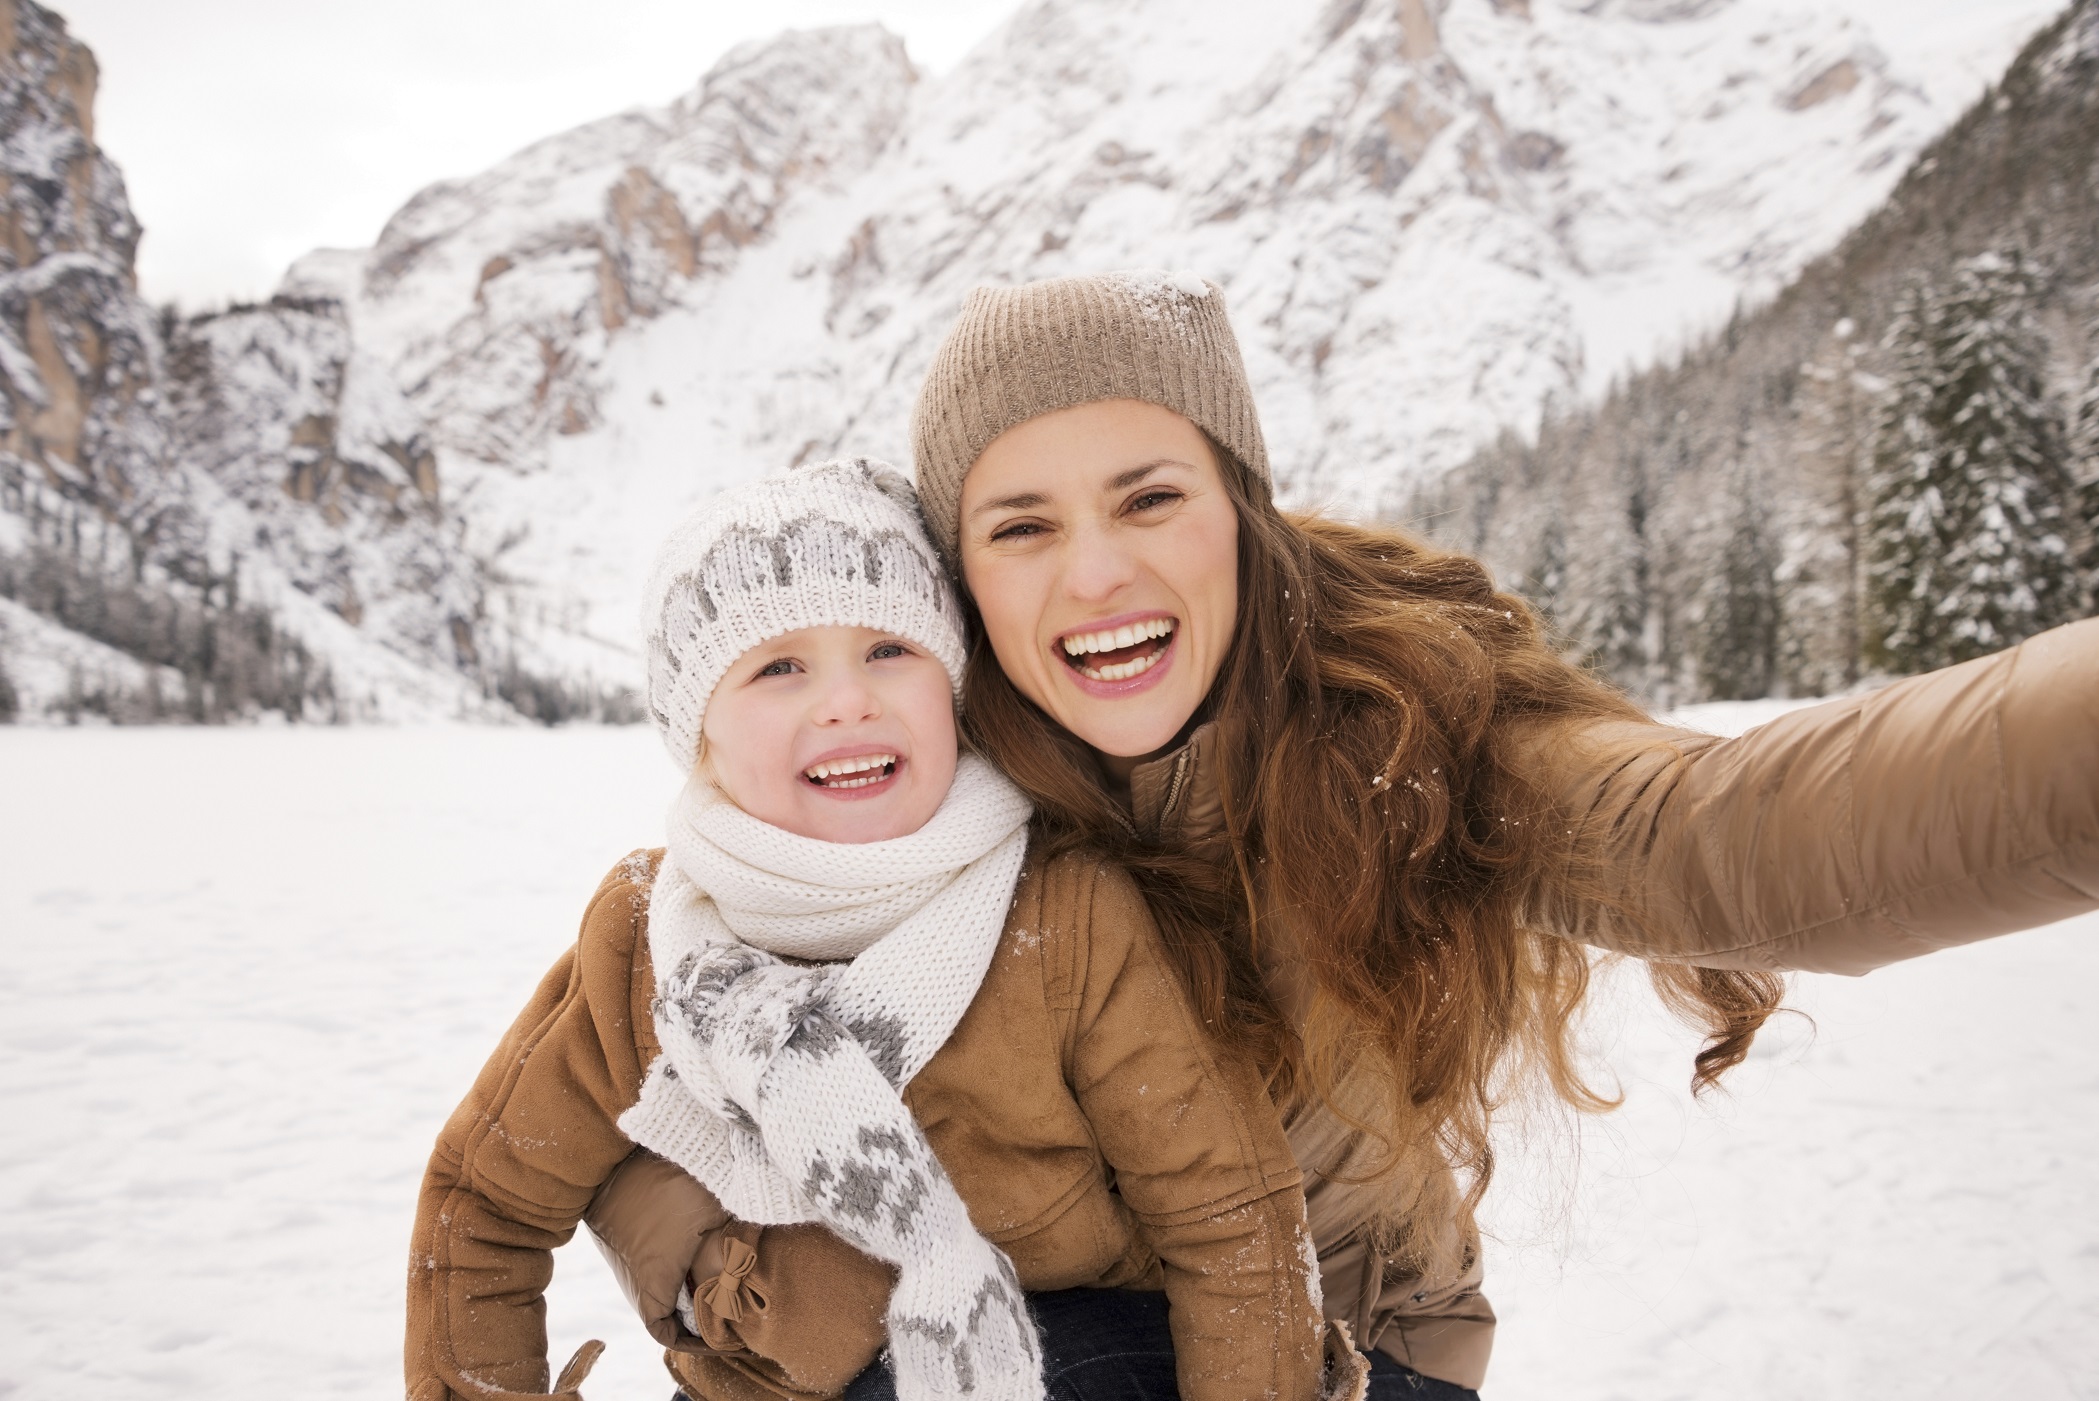 Mother and child taking selfie among snow-capped mountains